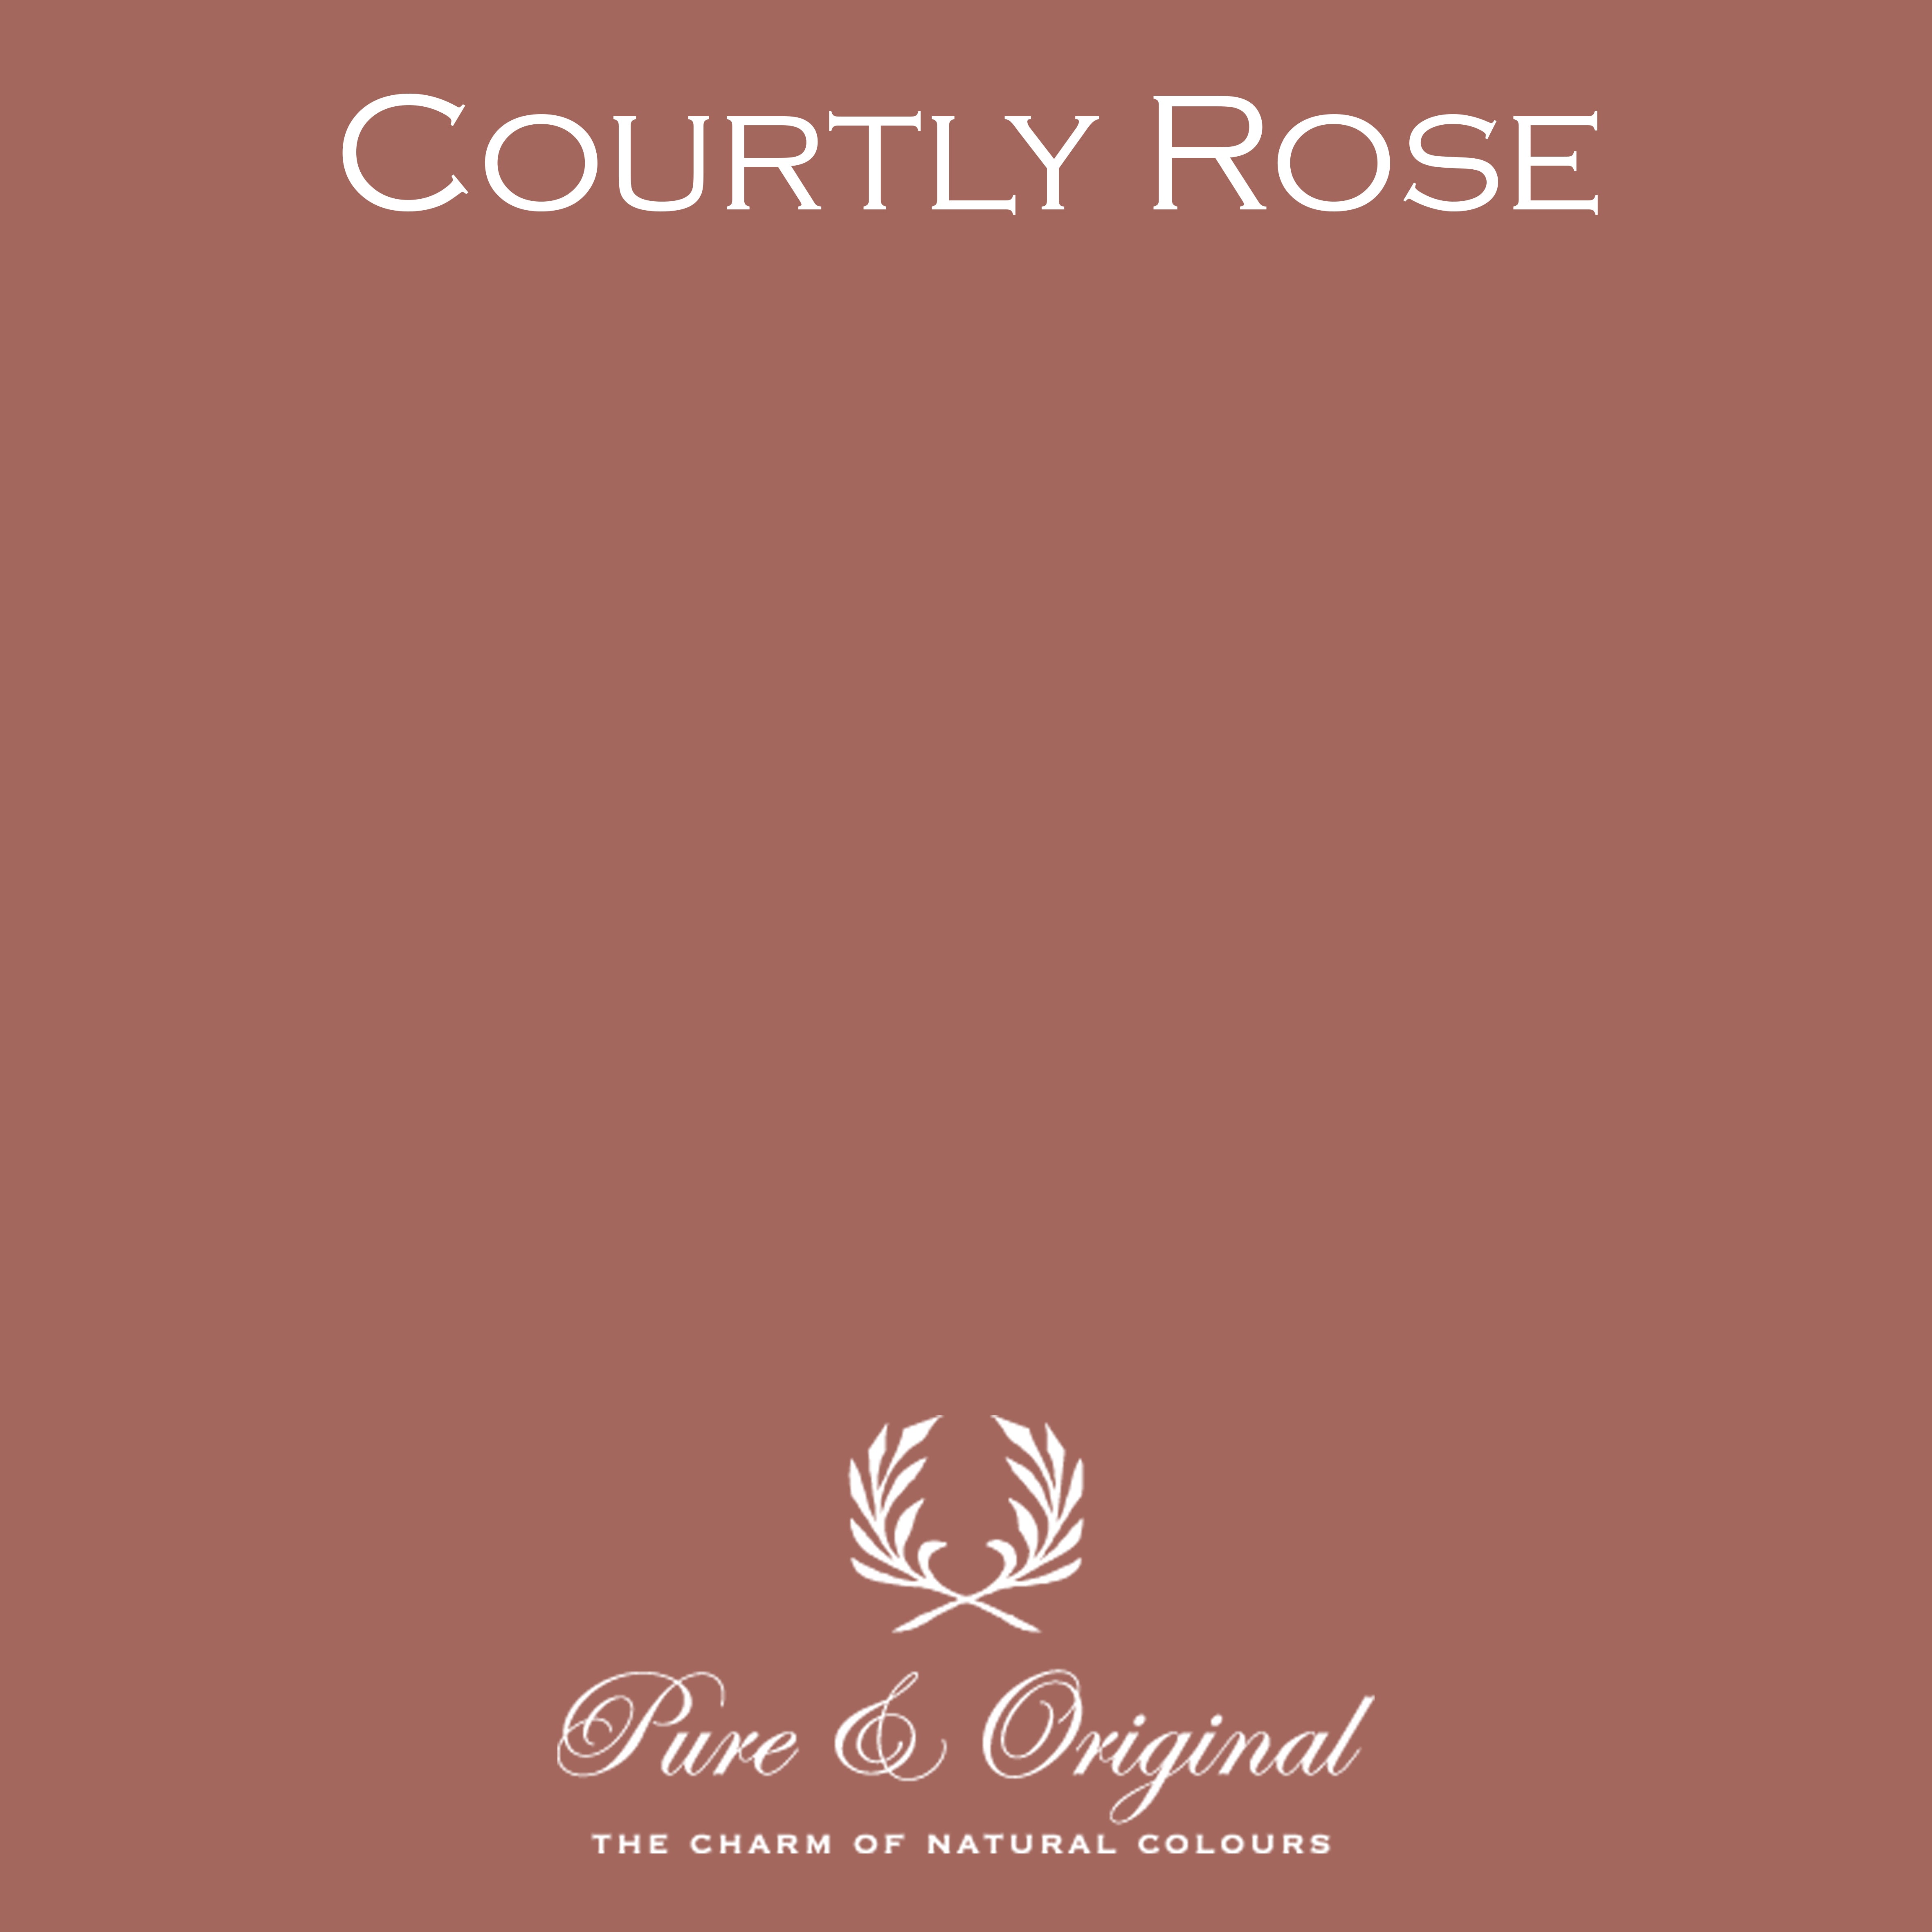 Carazzo "Courtly Rose"